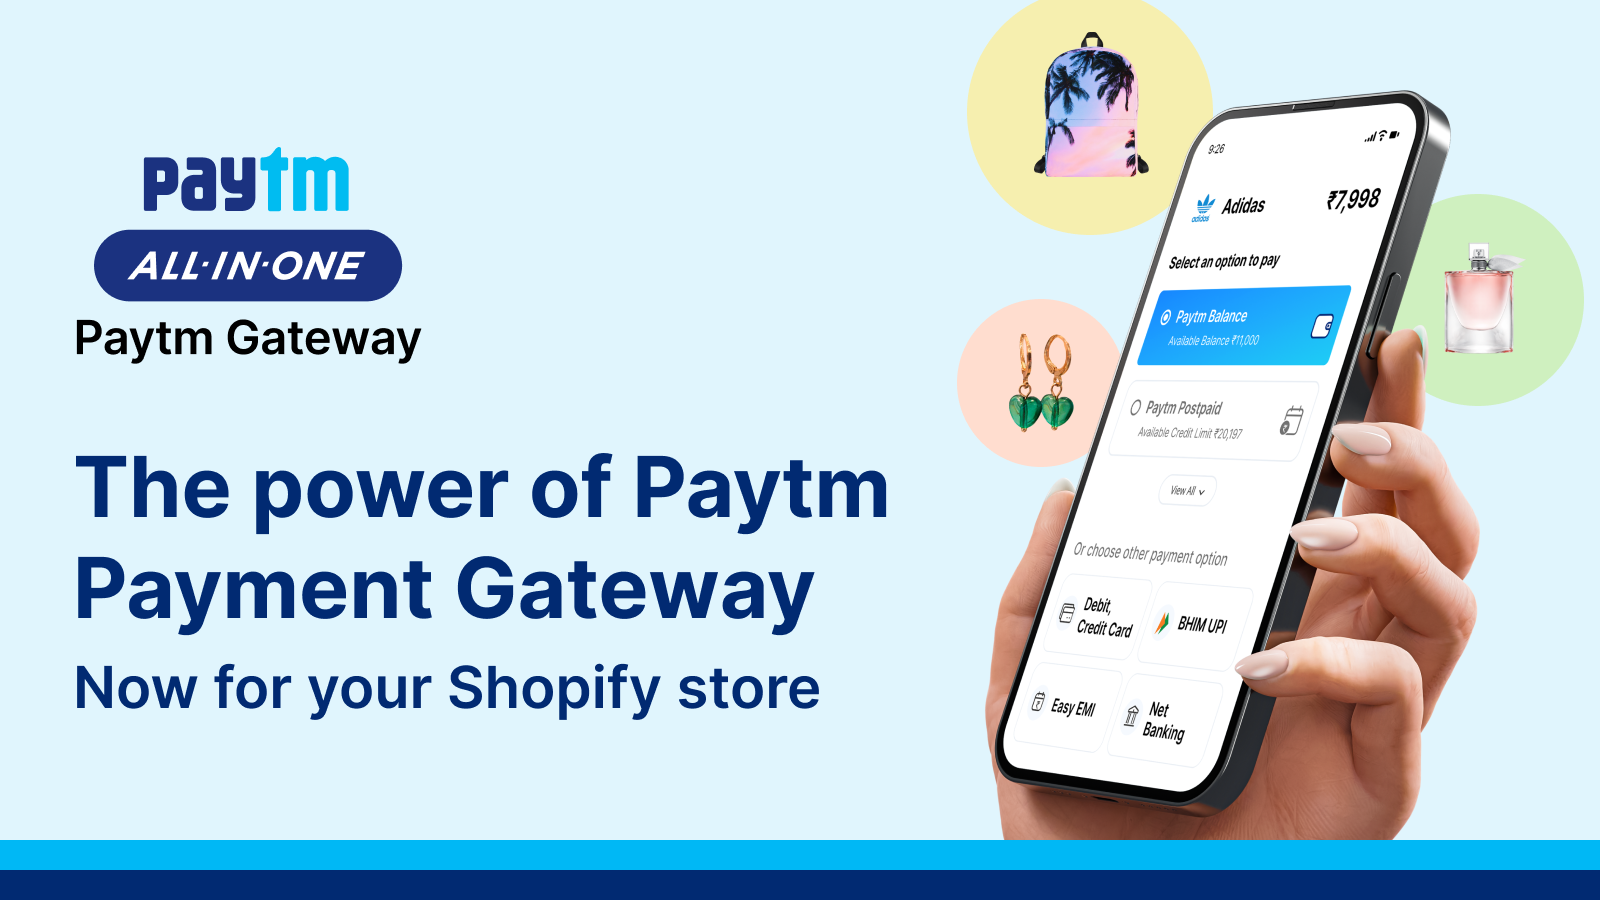 Accept payments seamlessly via Paytm Payment Gateway